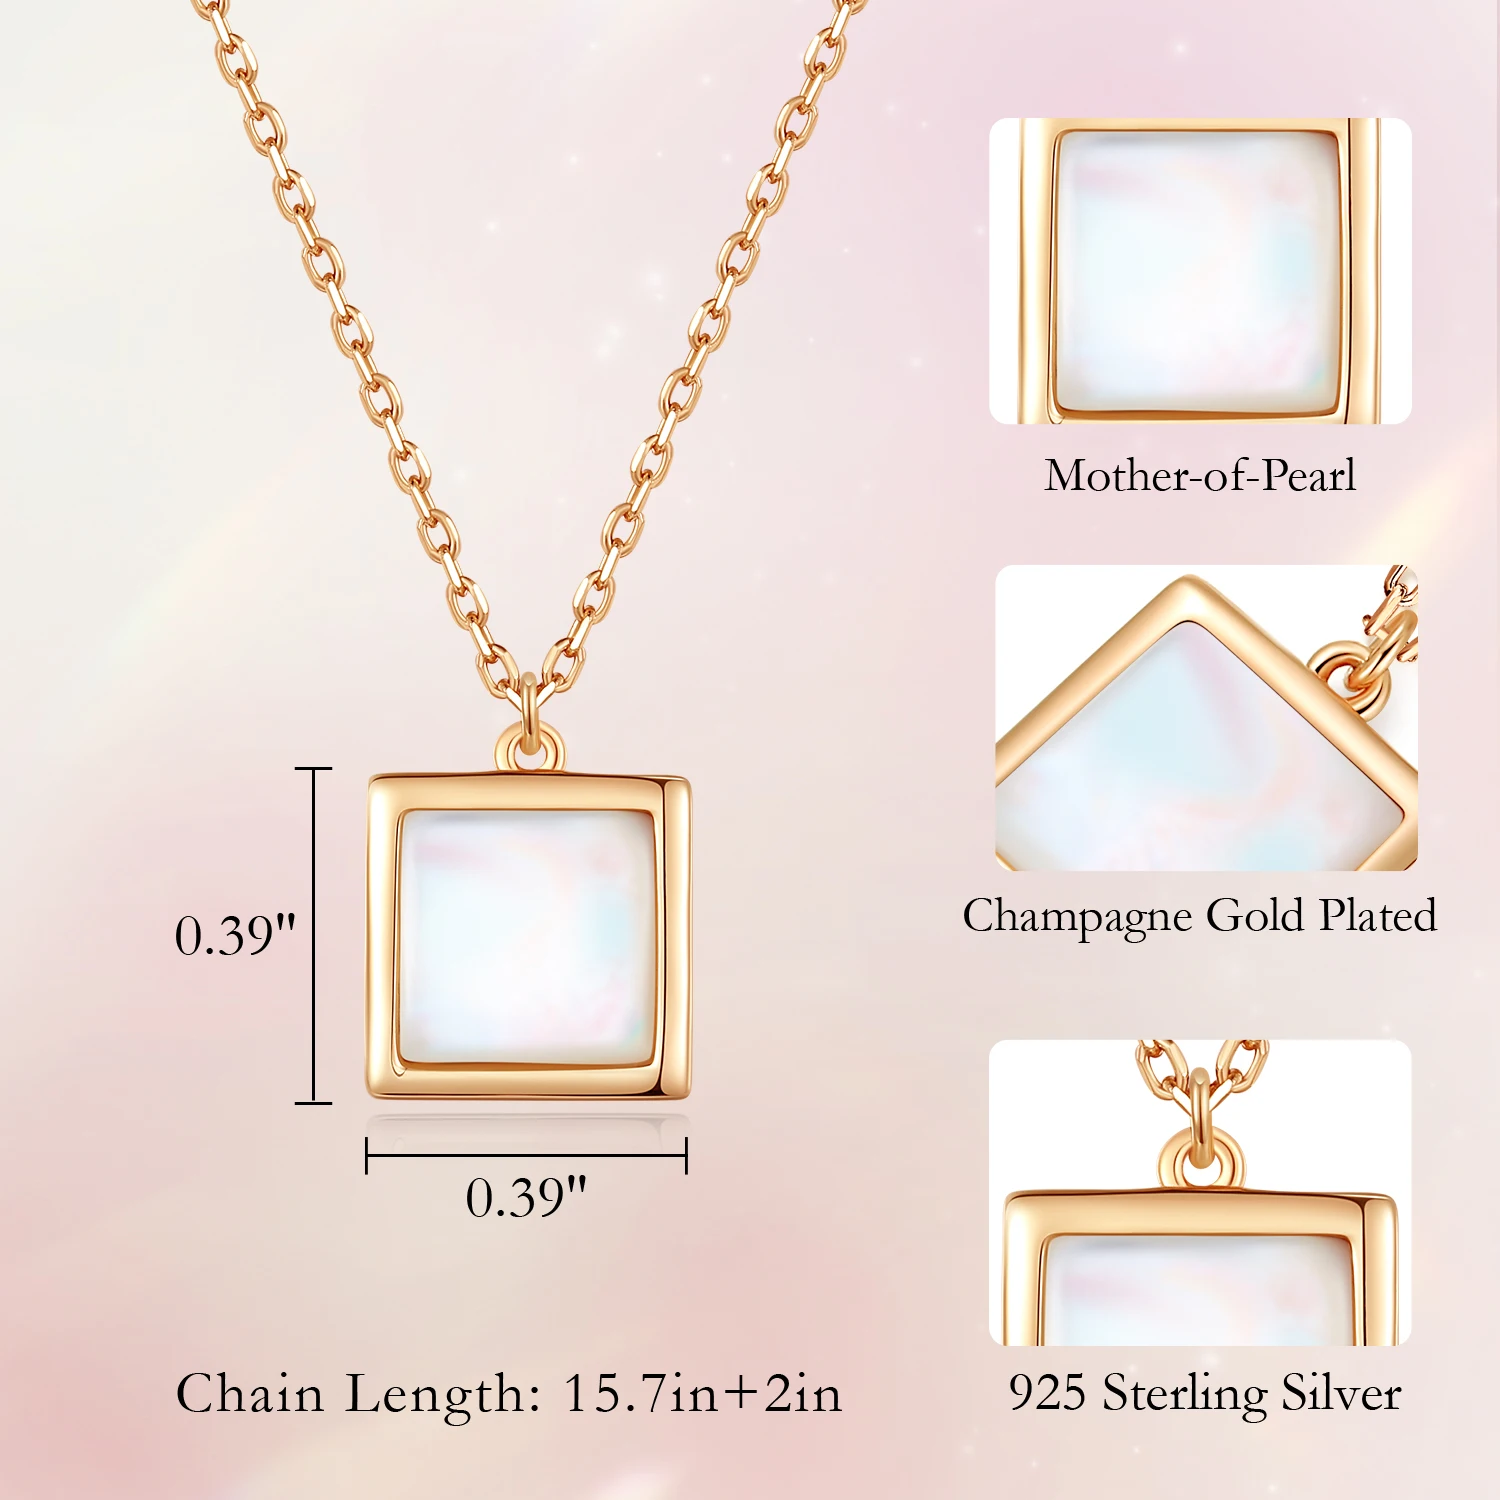 CDE YN1162 Fine Jewelry 925 Sterling Silver Necklace Wholesale Mother Of Pearl Pendant Rose Gold Plated Chain Pendant Necklace